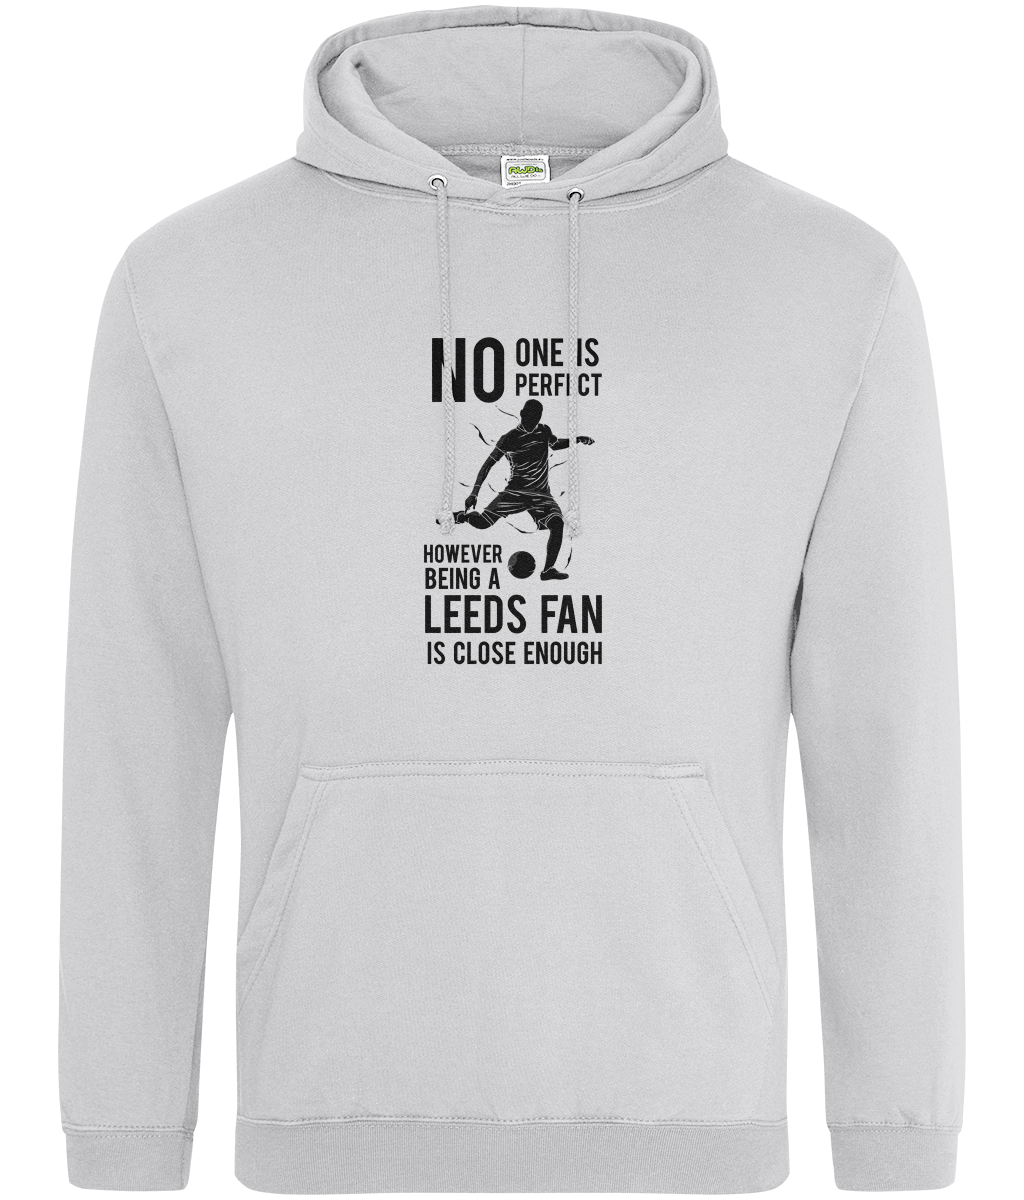 No One Is Perfect However Bing A Leeds Fan Is Close Enough Hoodie Women